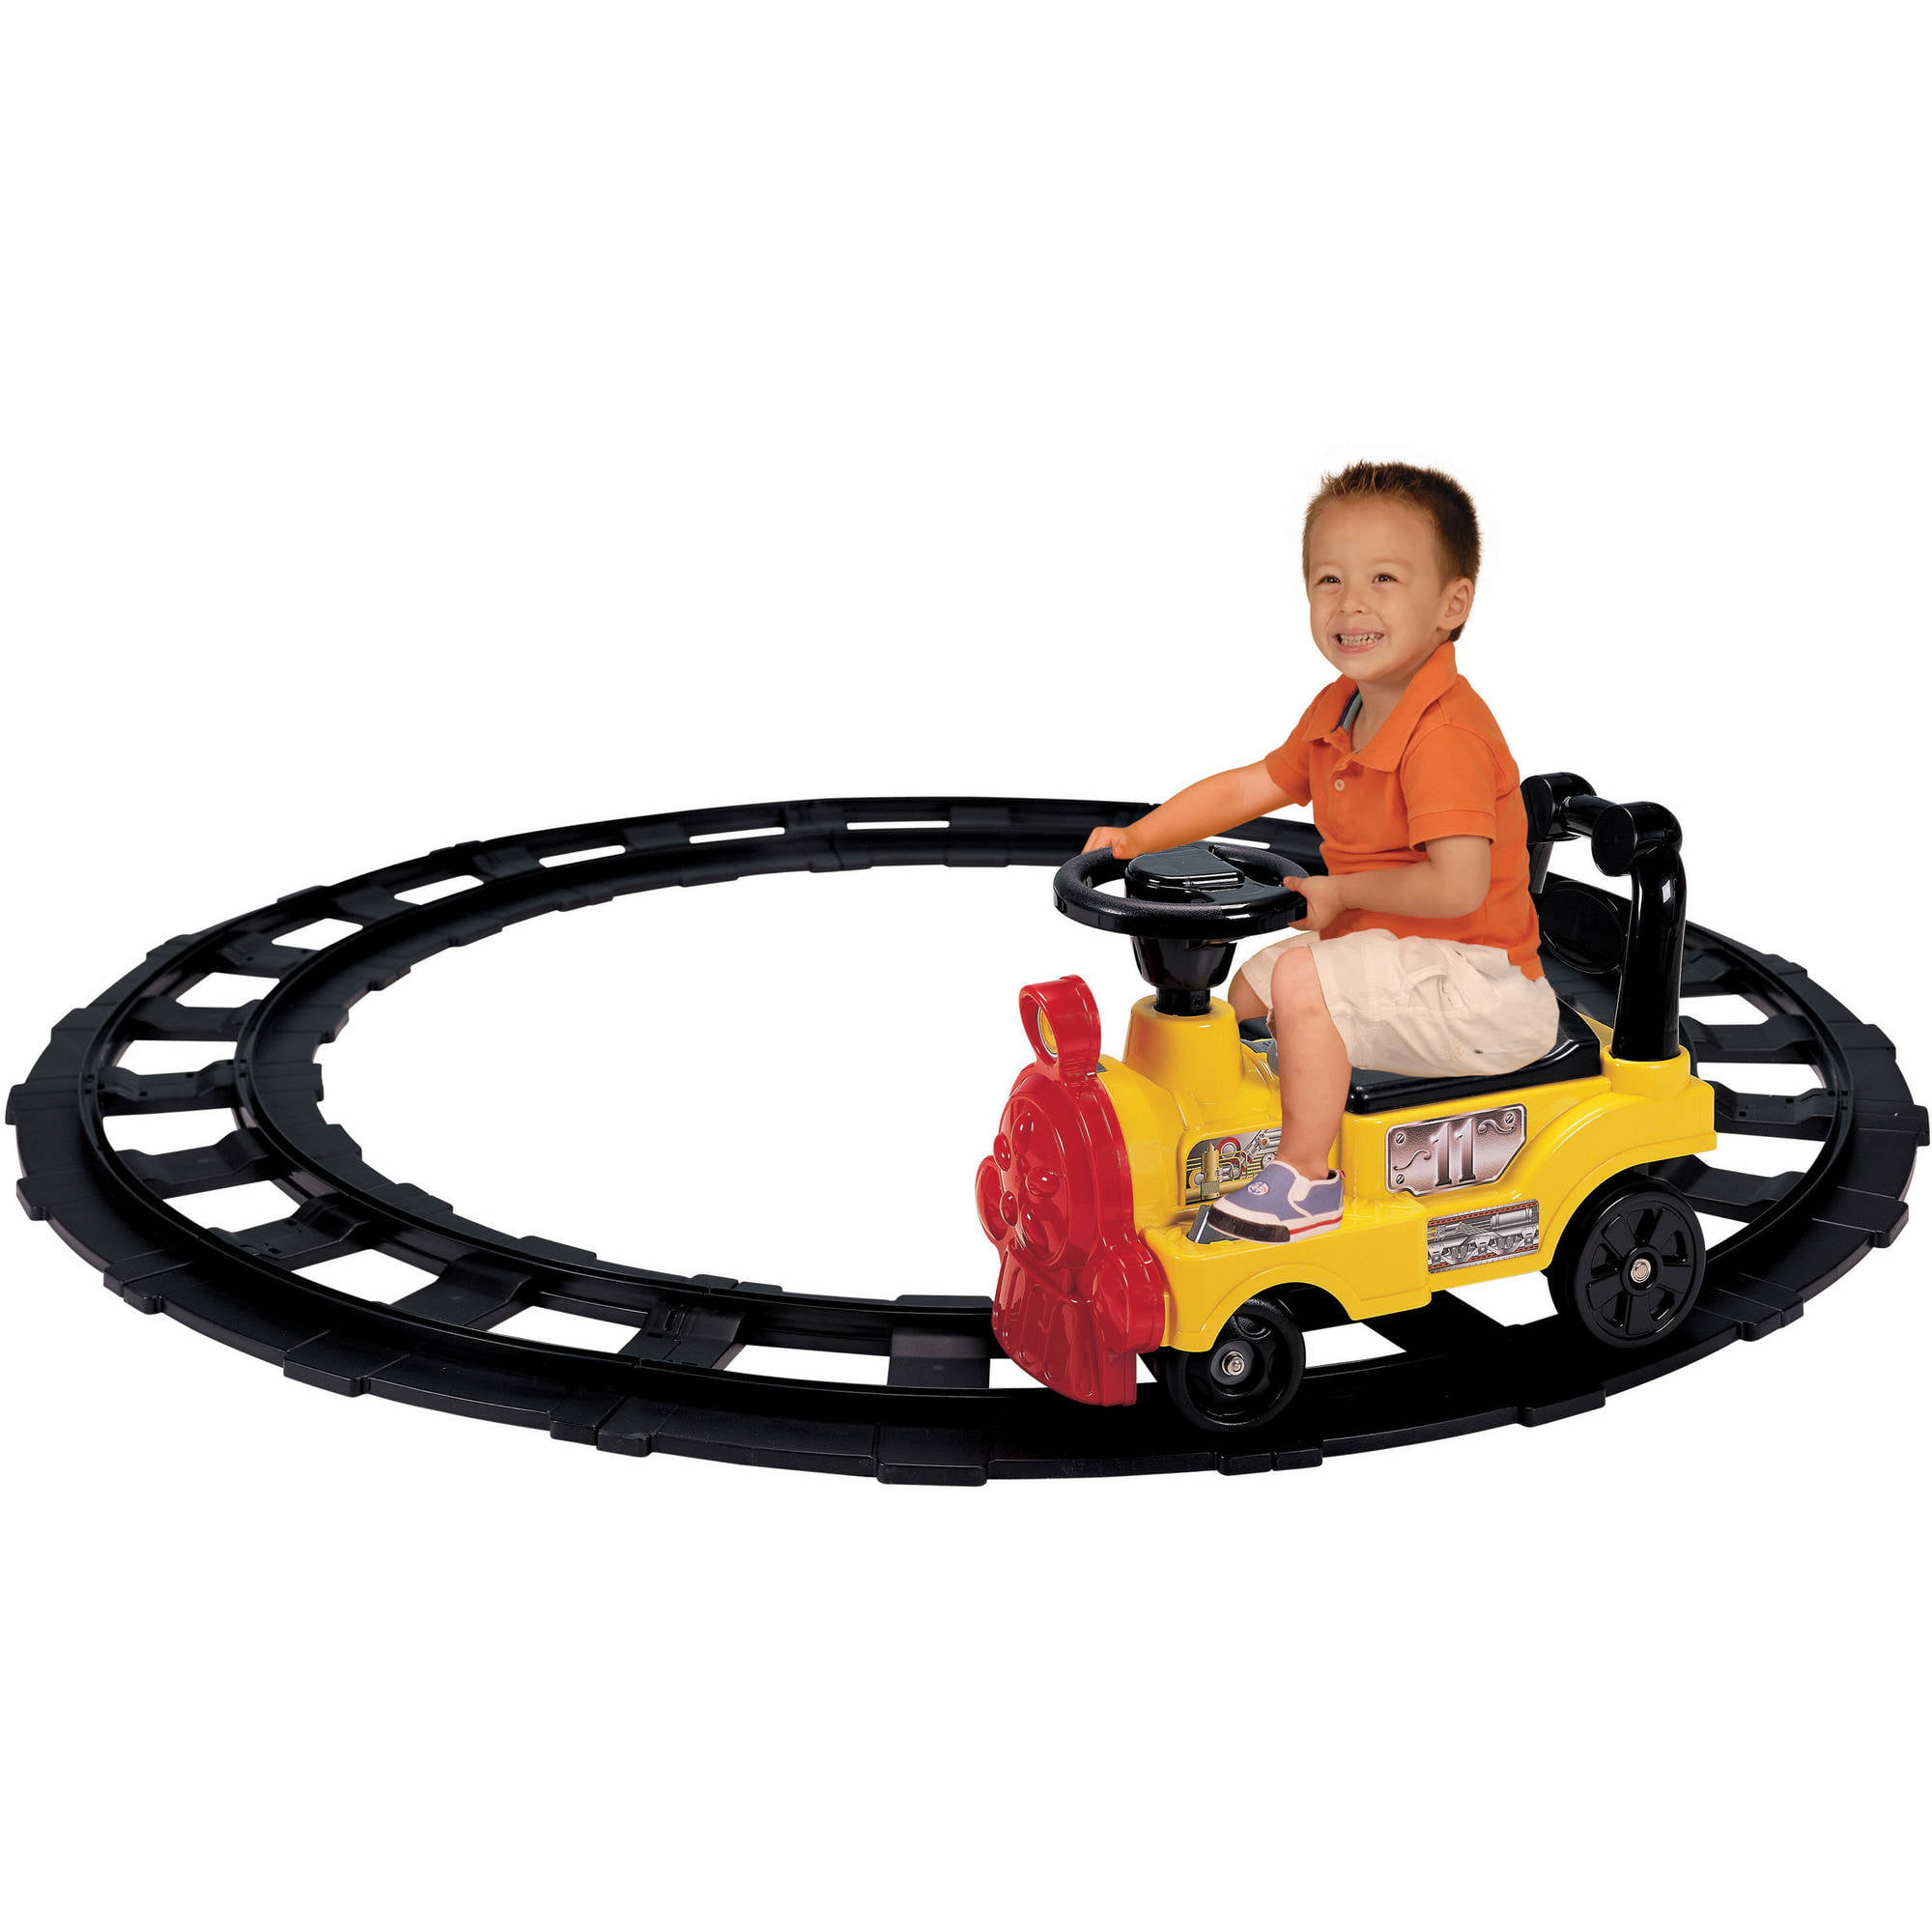 ride on toy train with tracks